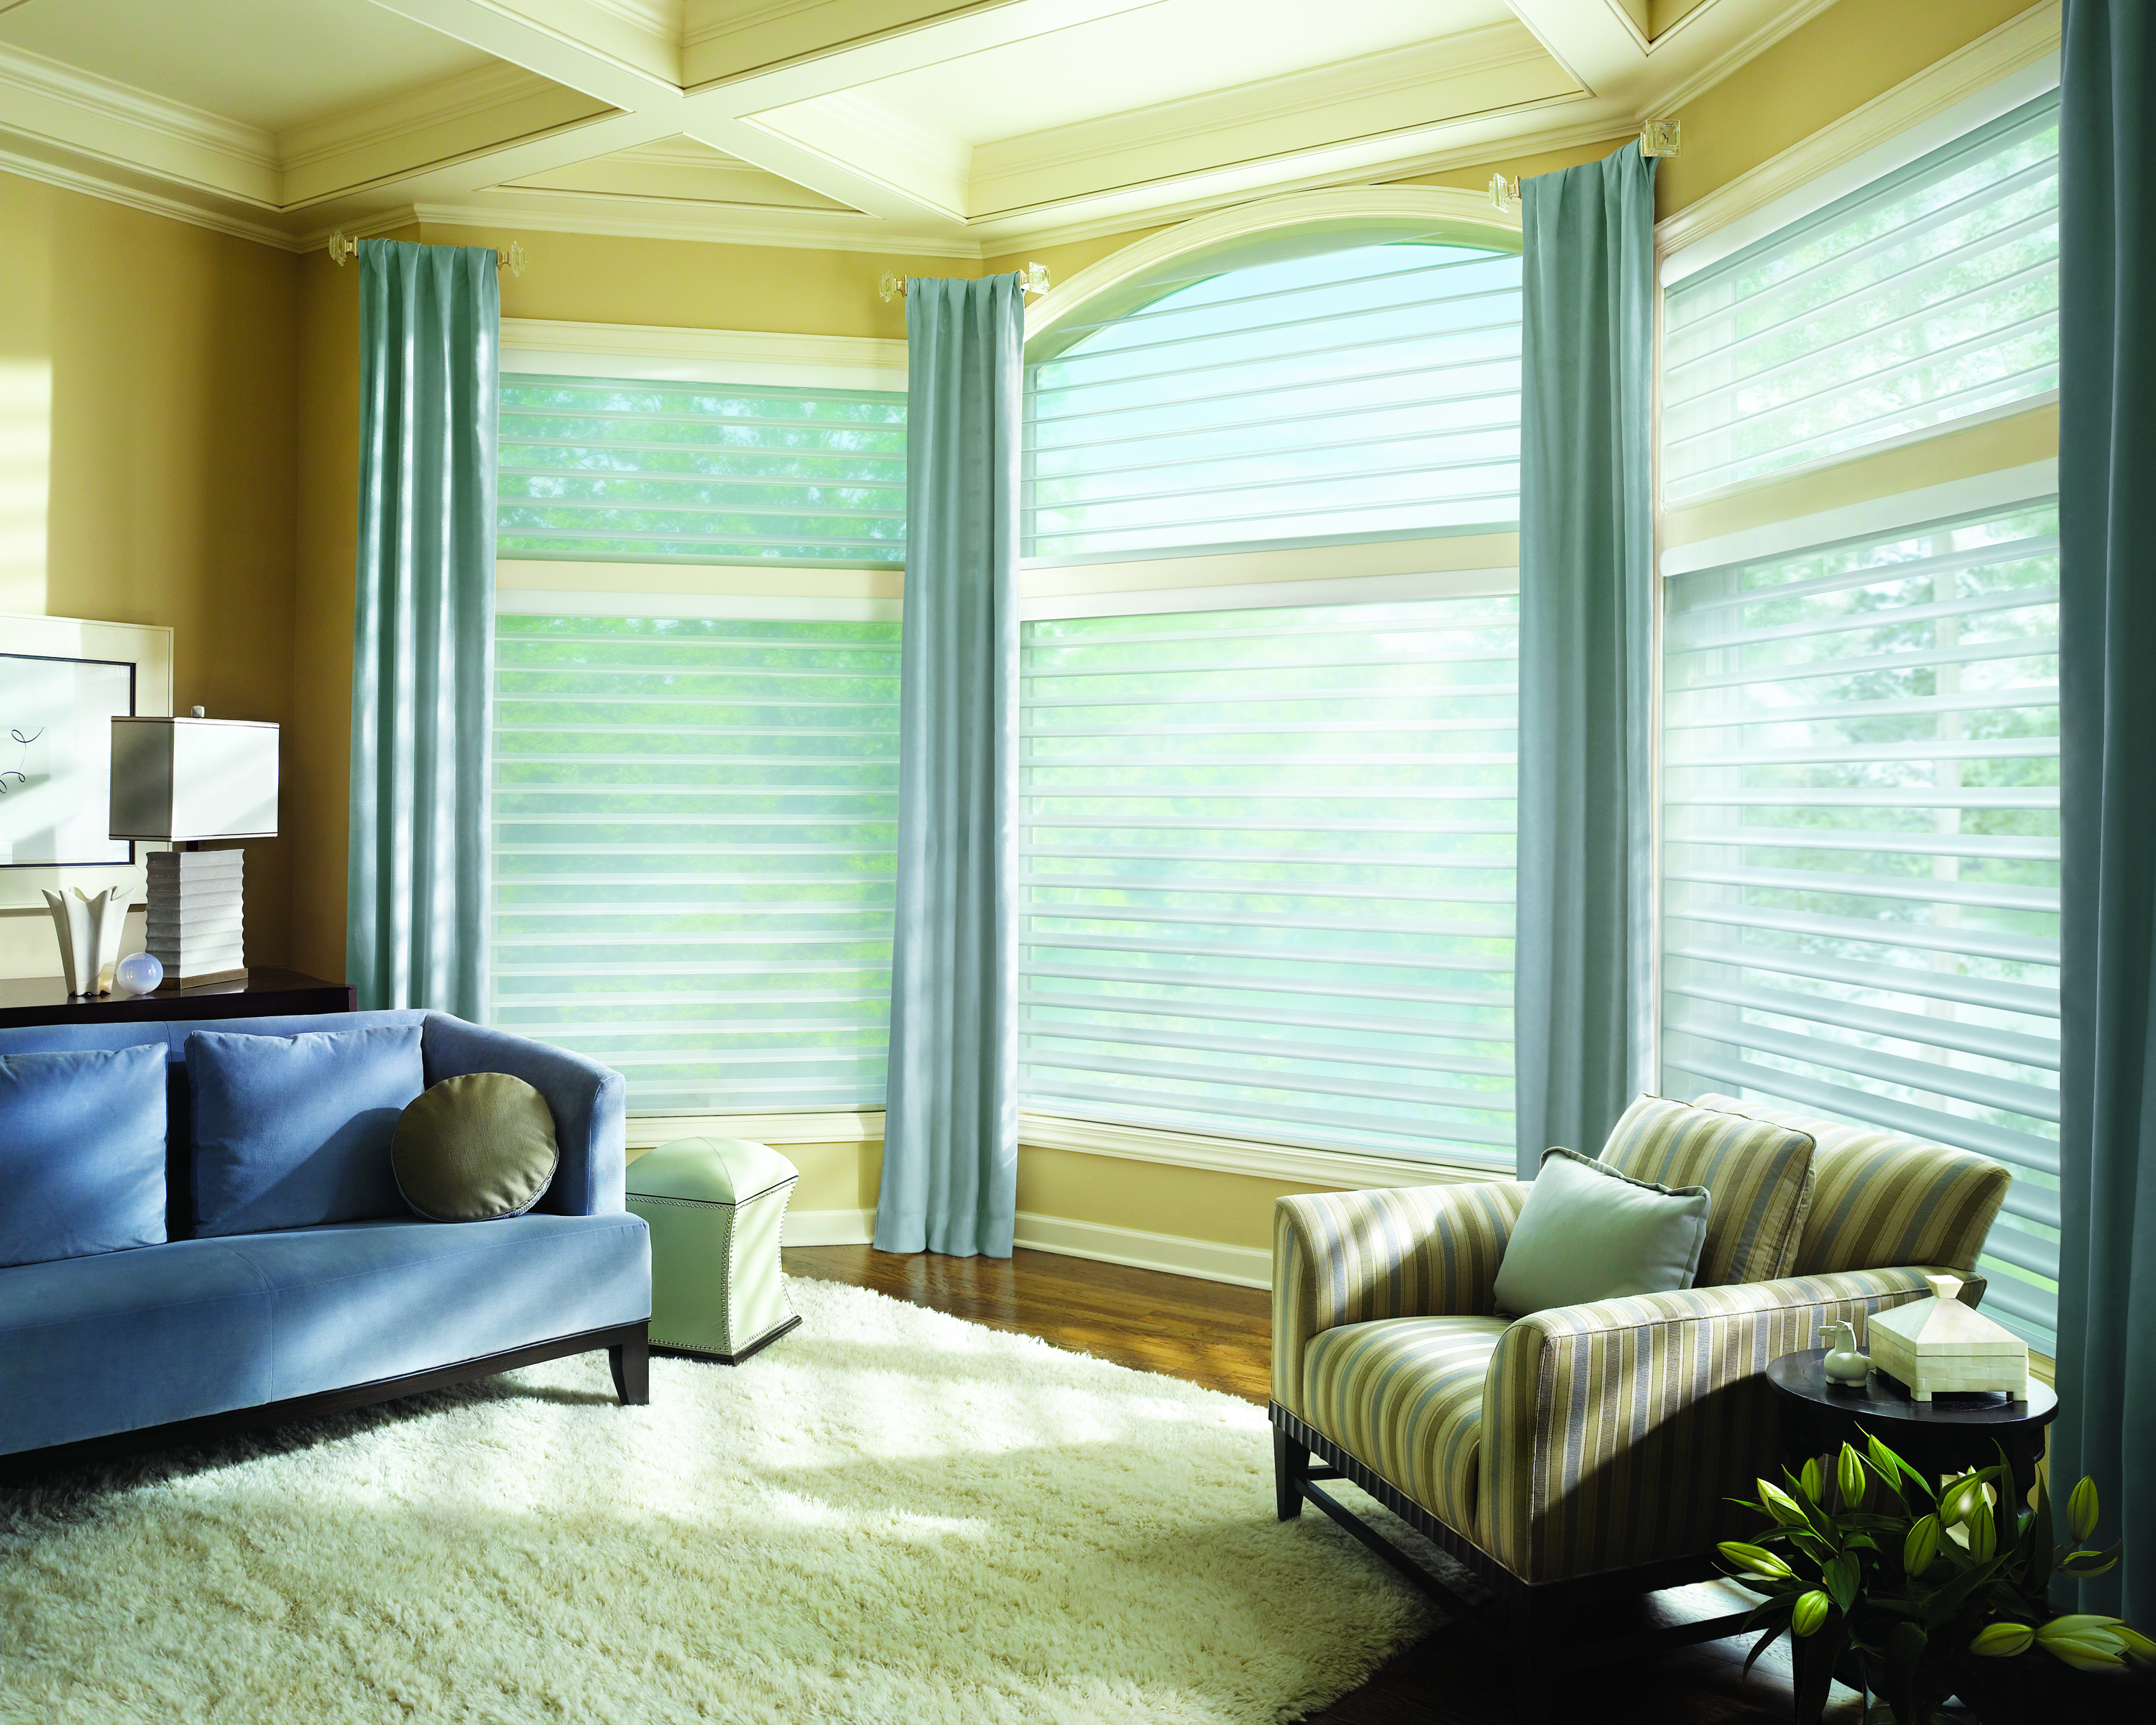 Let natural light in with silhouette sheer shades